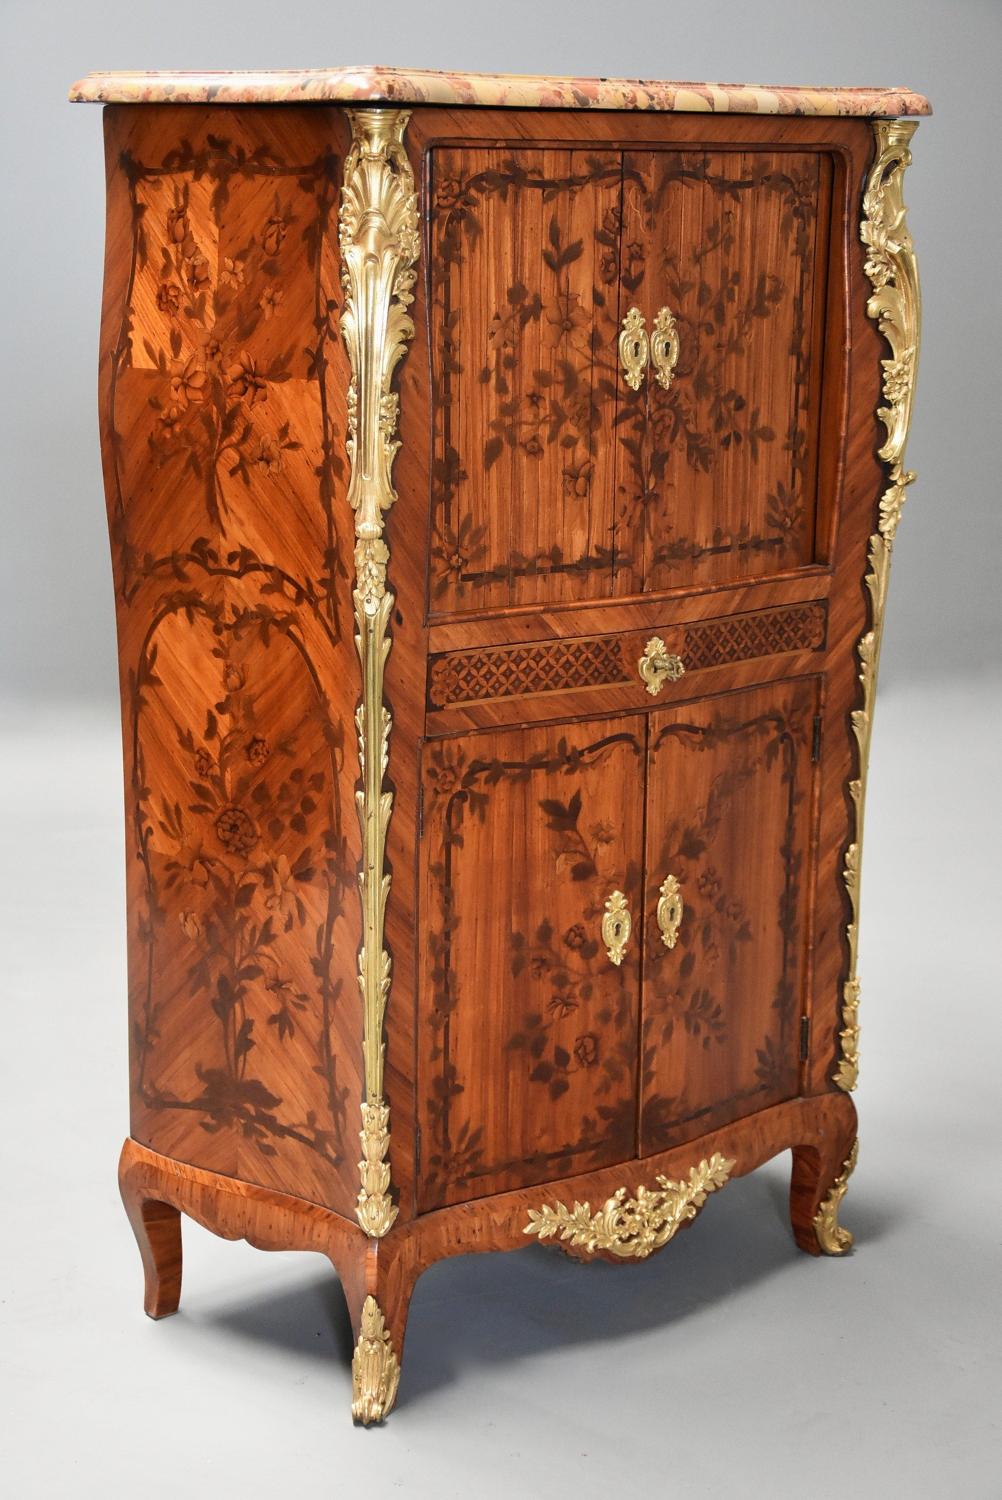 Rare fine quality French 18thc secretaire cabinet attributed to RVLC